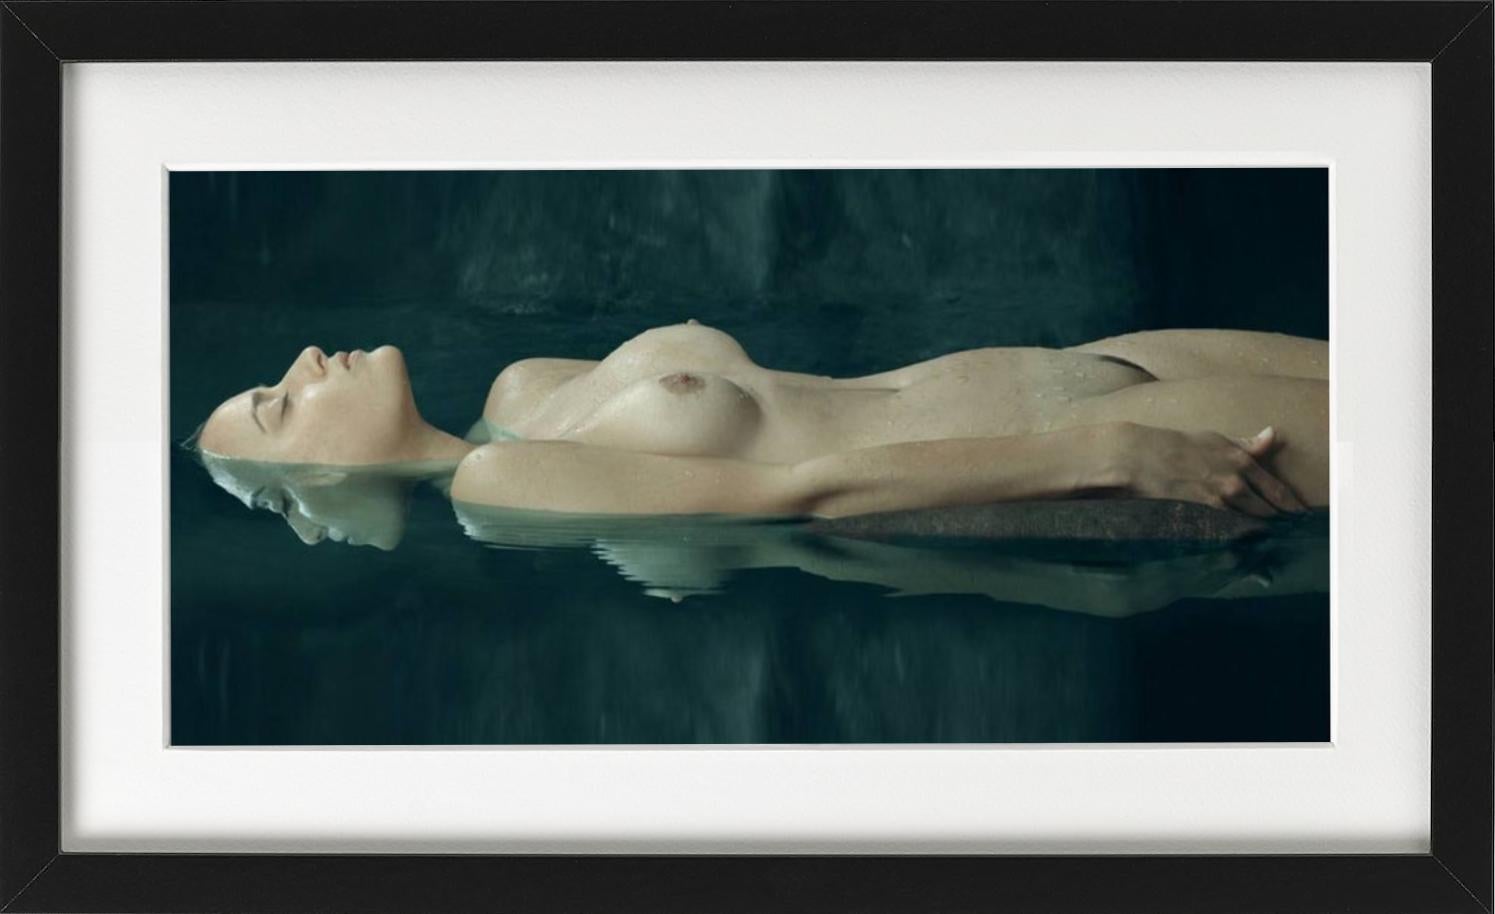 Erin Floating - nude model floating in green Water, fine art photography, 2011 - Contemporary Photograph by Albert Watson